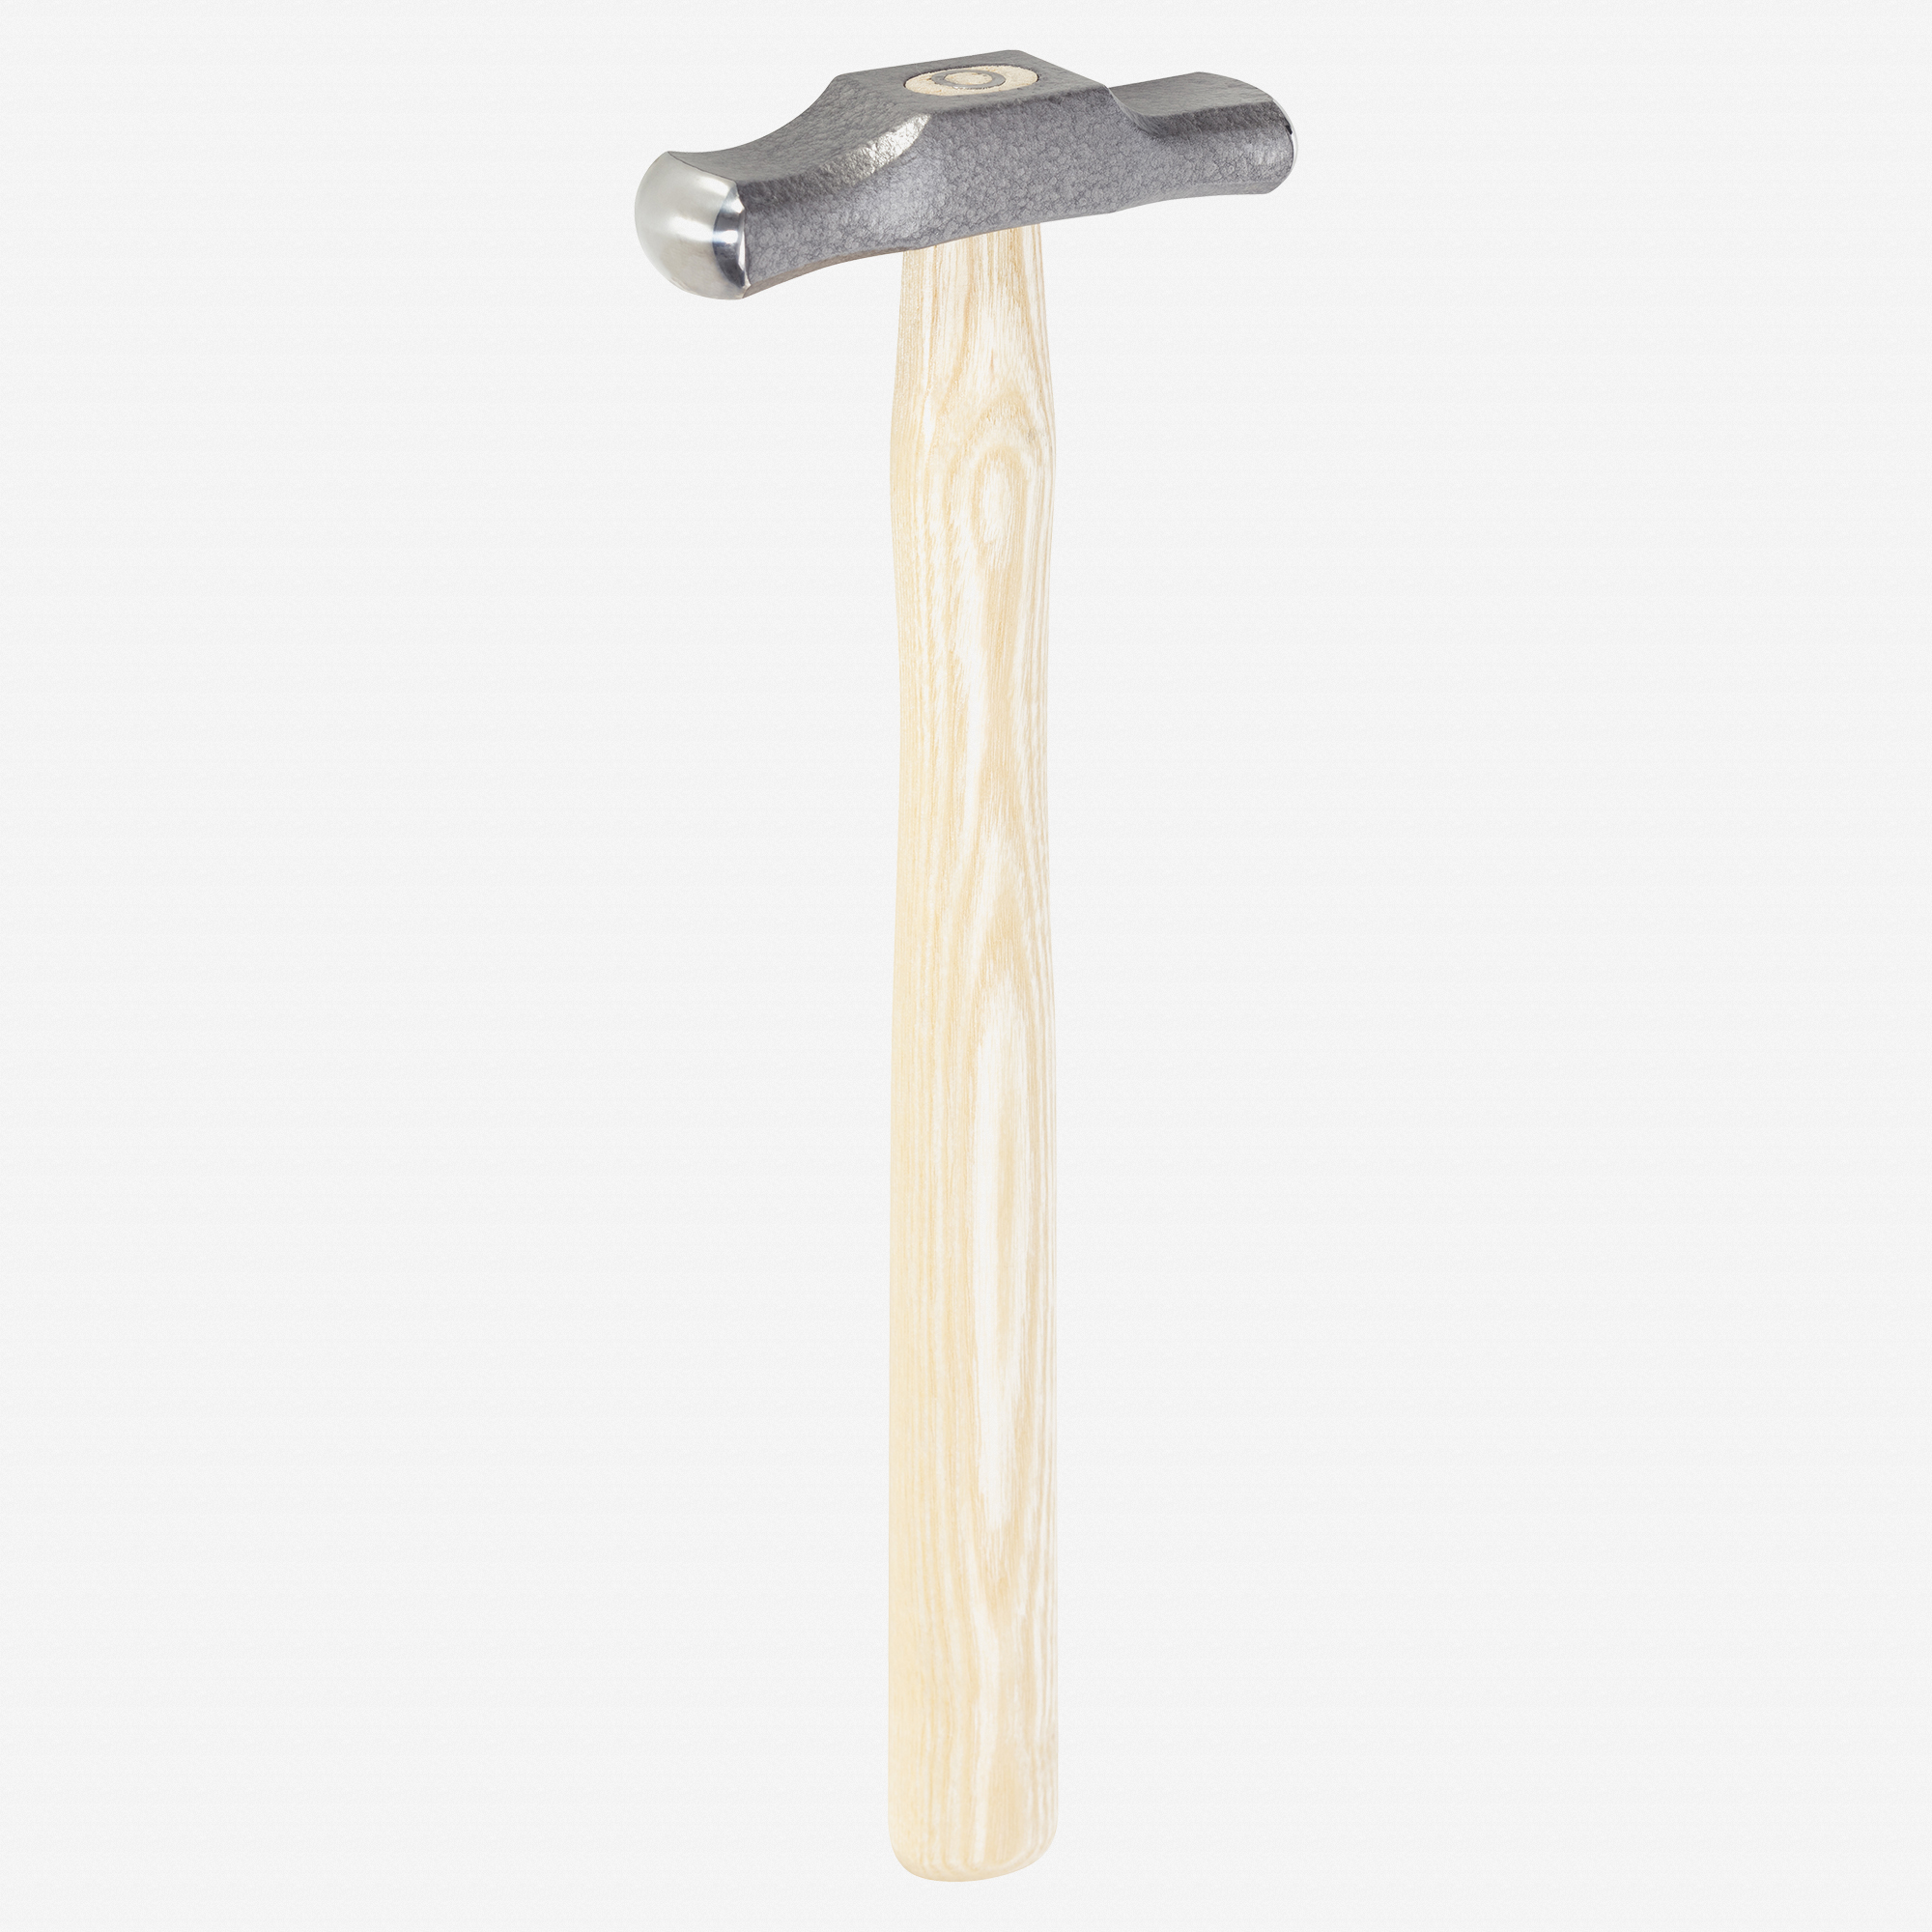 Picard 13oz Chasing Hammer for Silversmtihs, two differnetly arched channels, finely polished - KC Tool